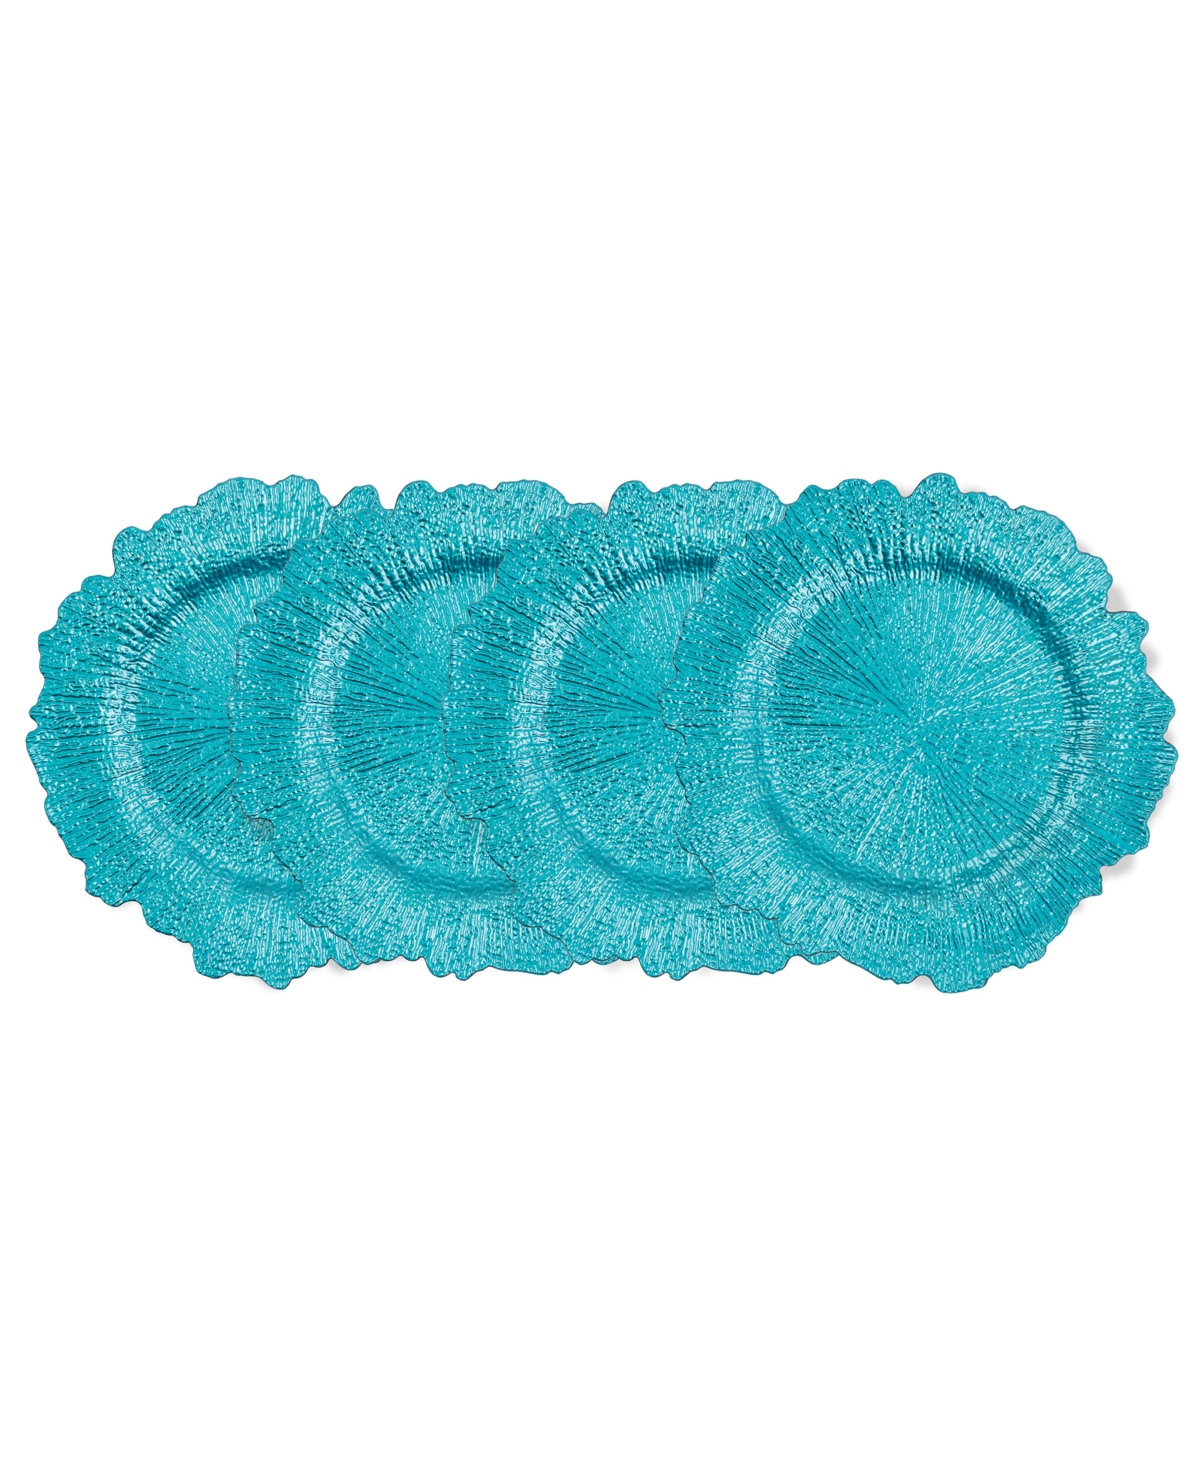 American Atelier Reef Set Of 4 Charger In Aqua